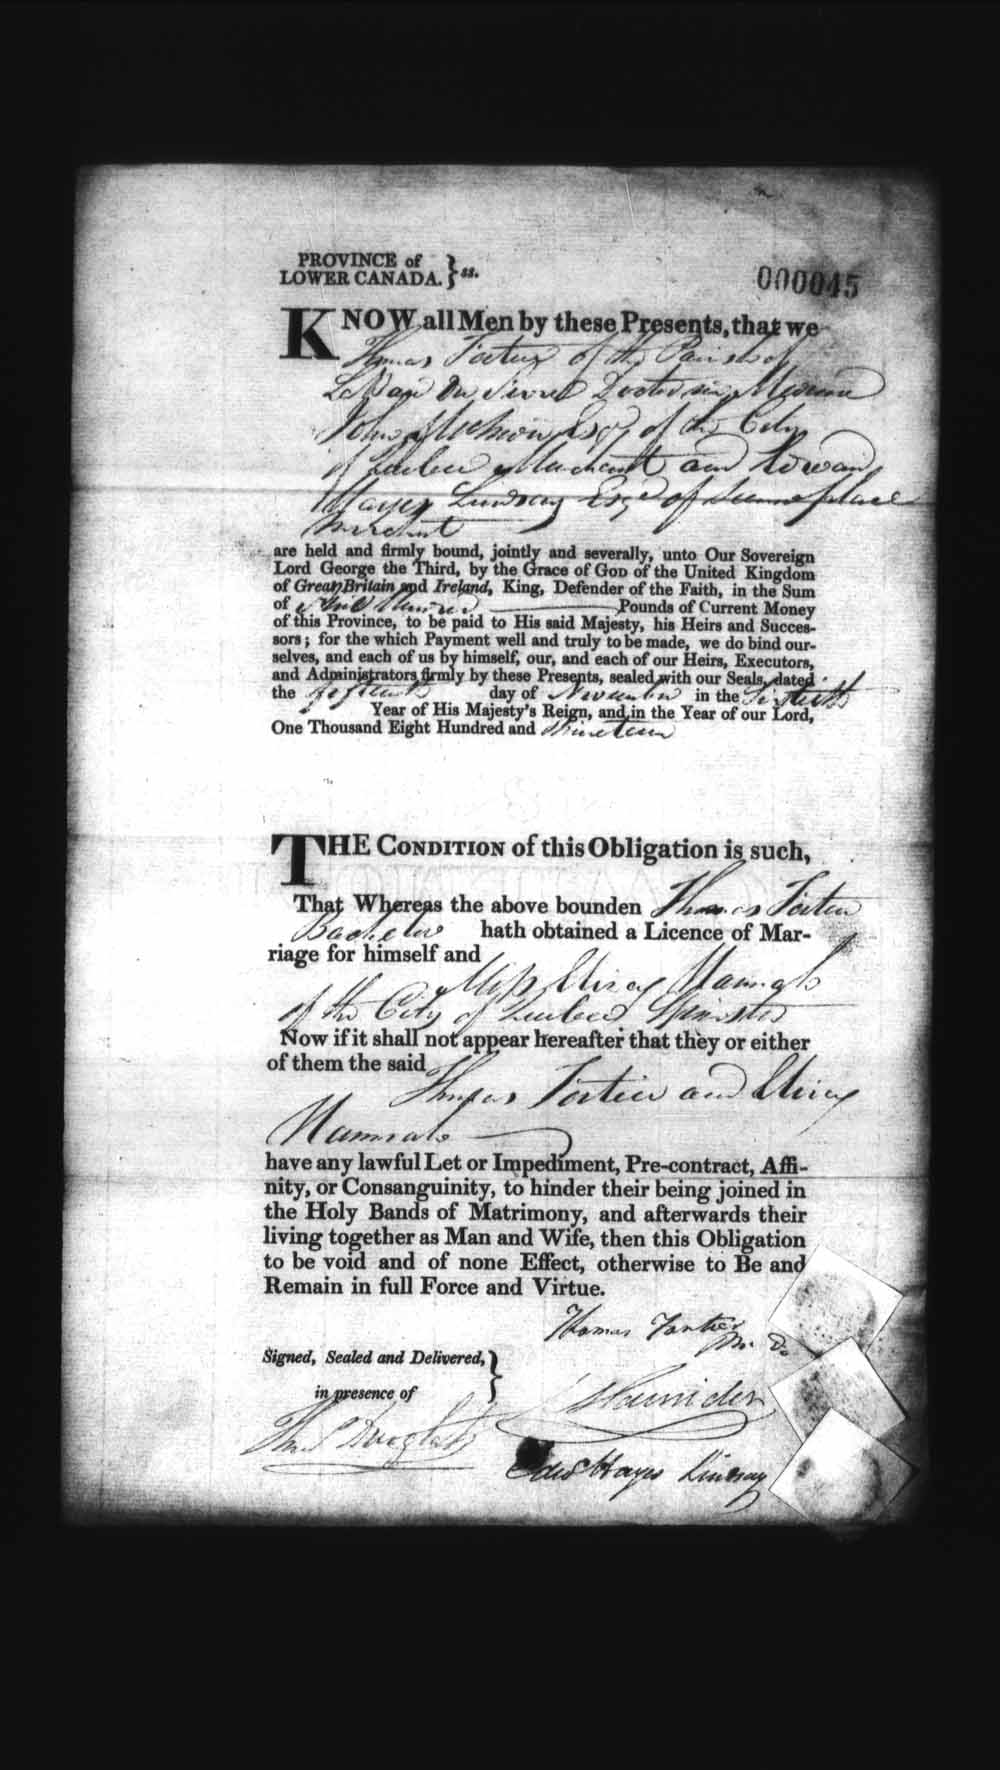 Digitized page of Upper and Lower Canada Marriage Bonds (1779-1865) for Image No.: e008235866